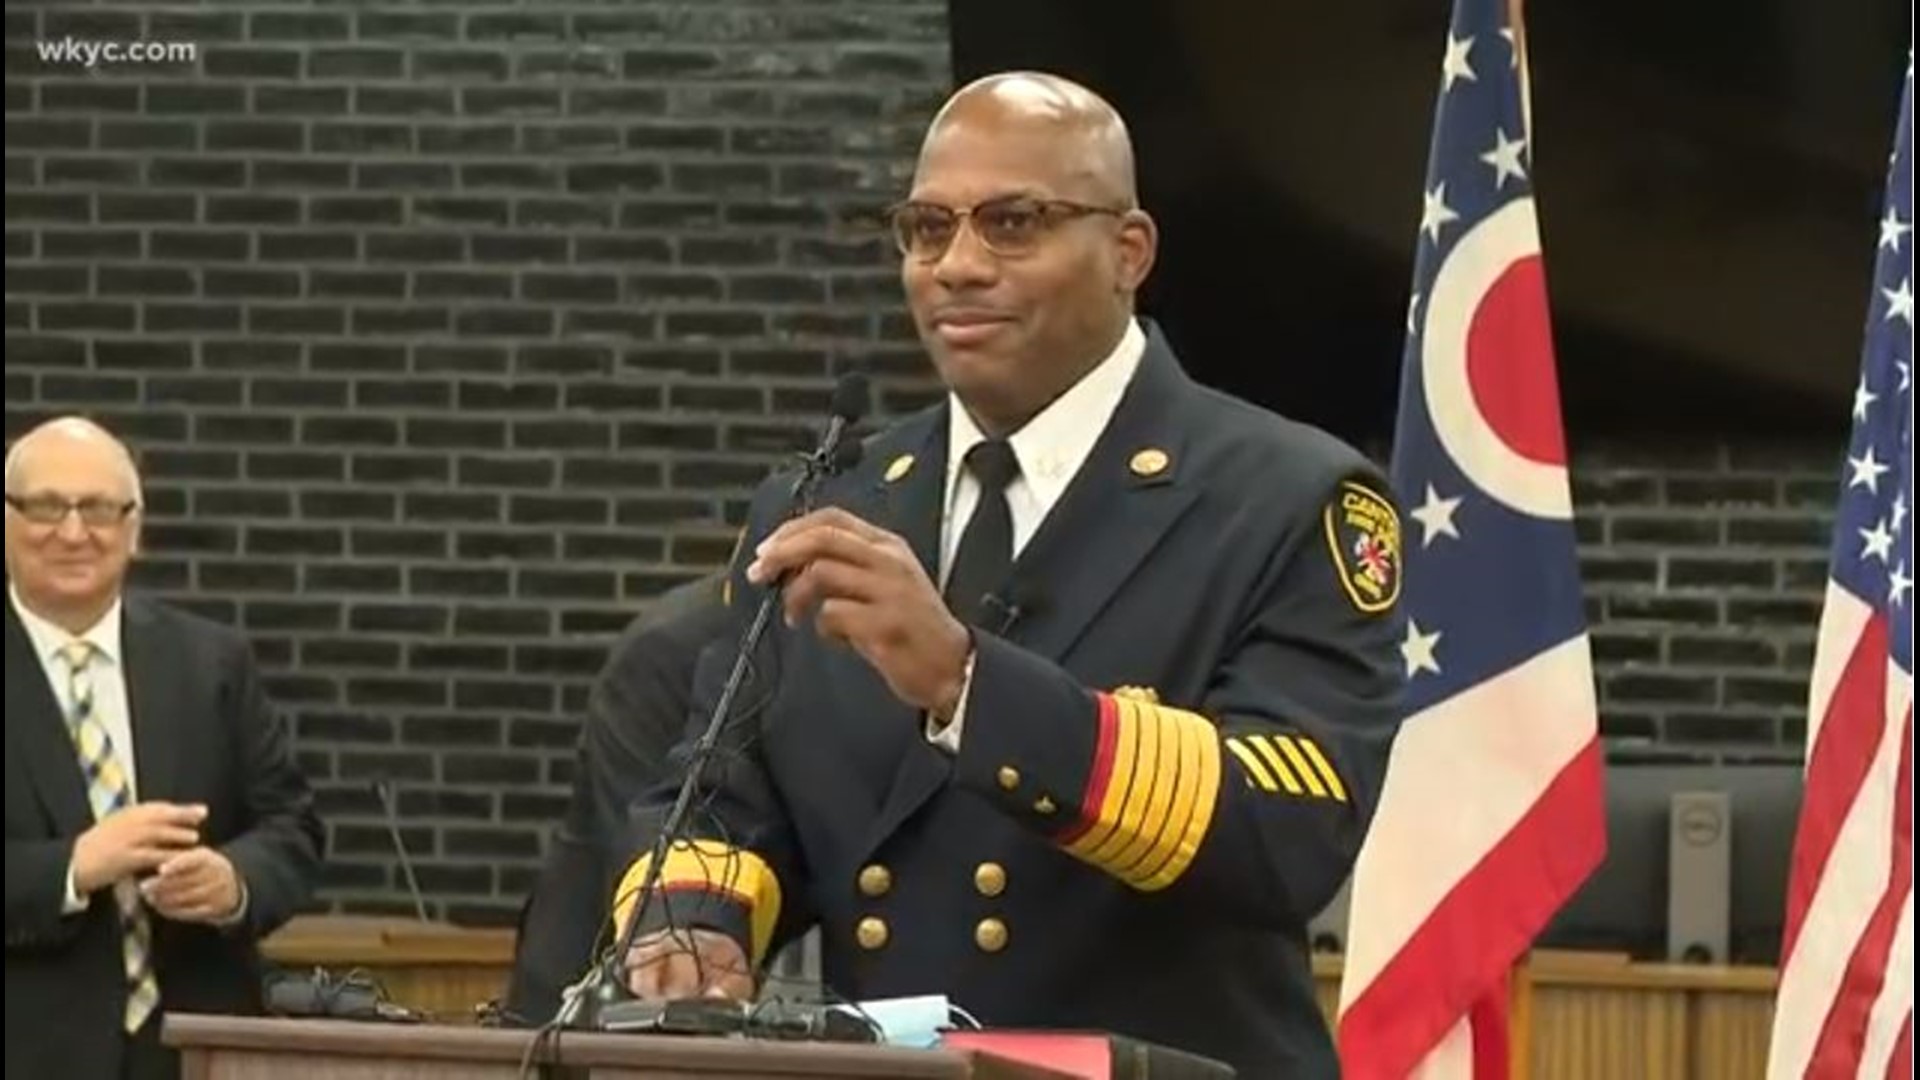 The Canton Fire Department has officially sworn in K. Akbar Bennett as their first African American chief.